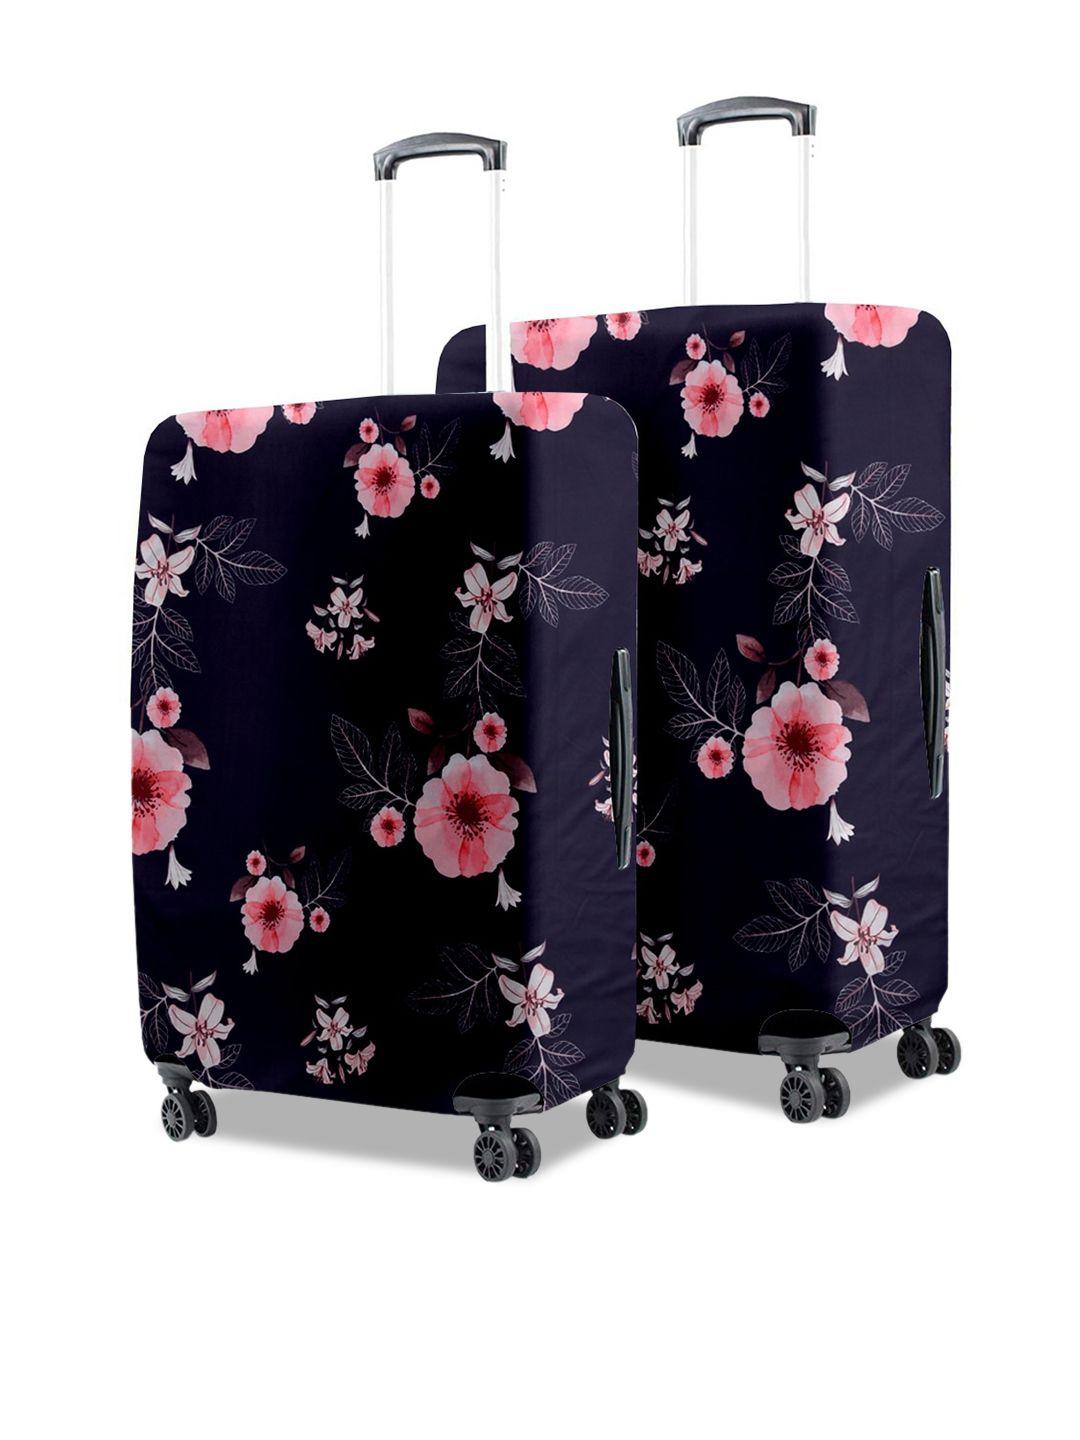 cortina set of 2 navy blue & pink eco friendly polyester printed trolley luggage covers